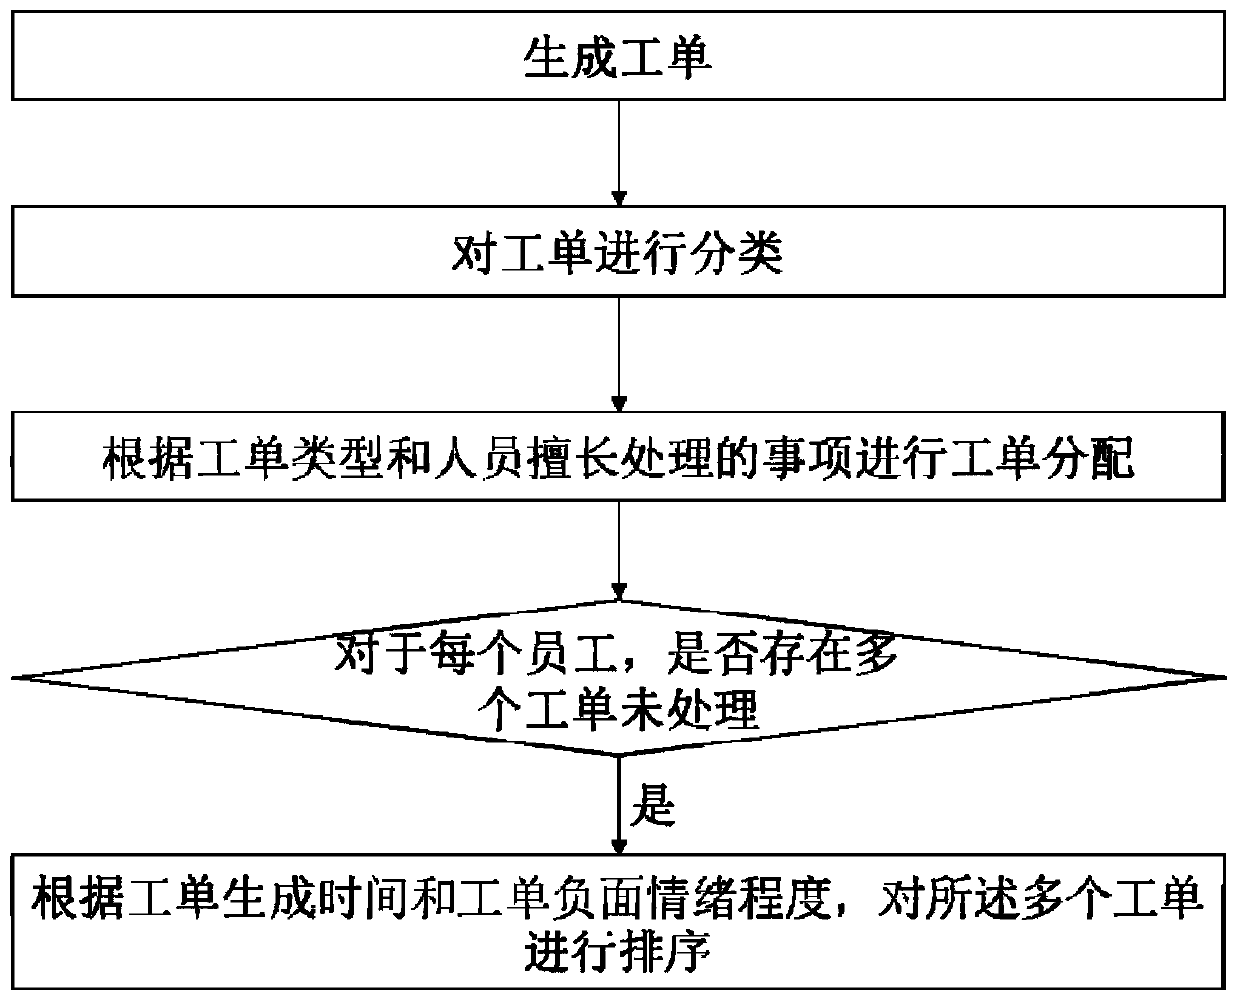 Power customer service work order processing system and method